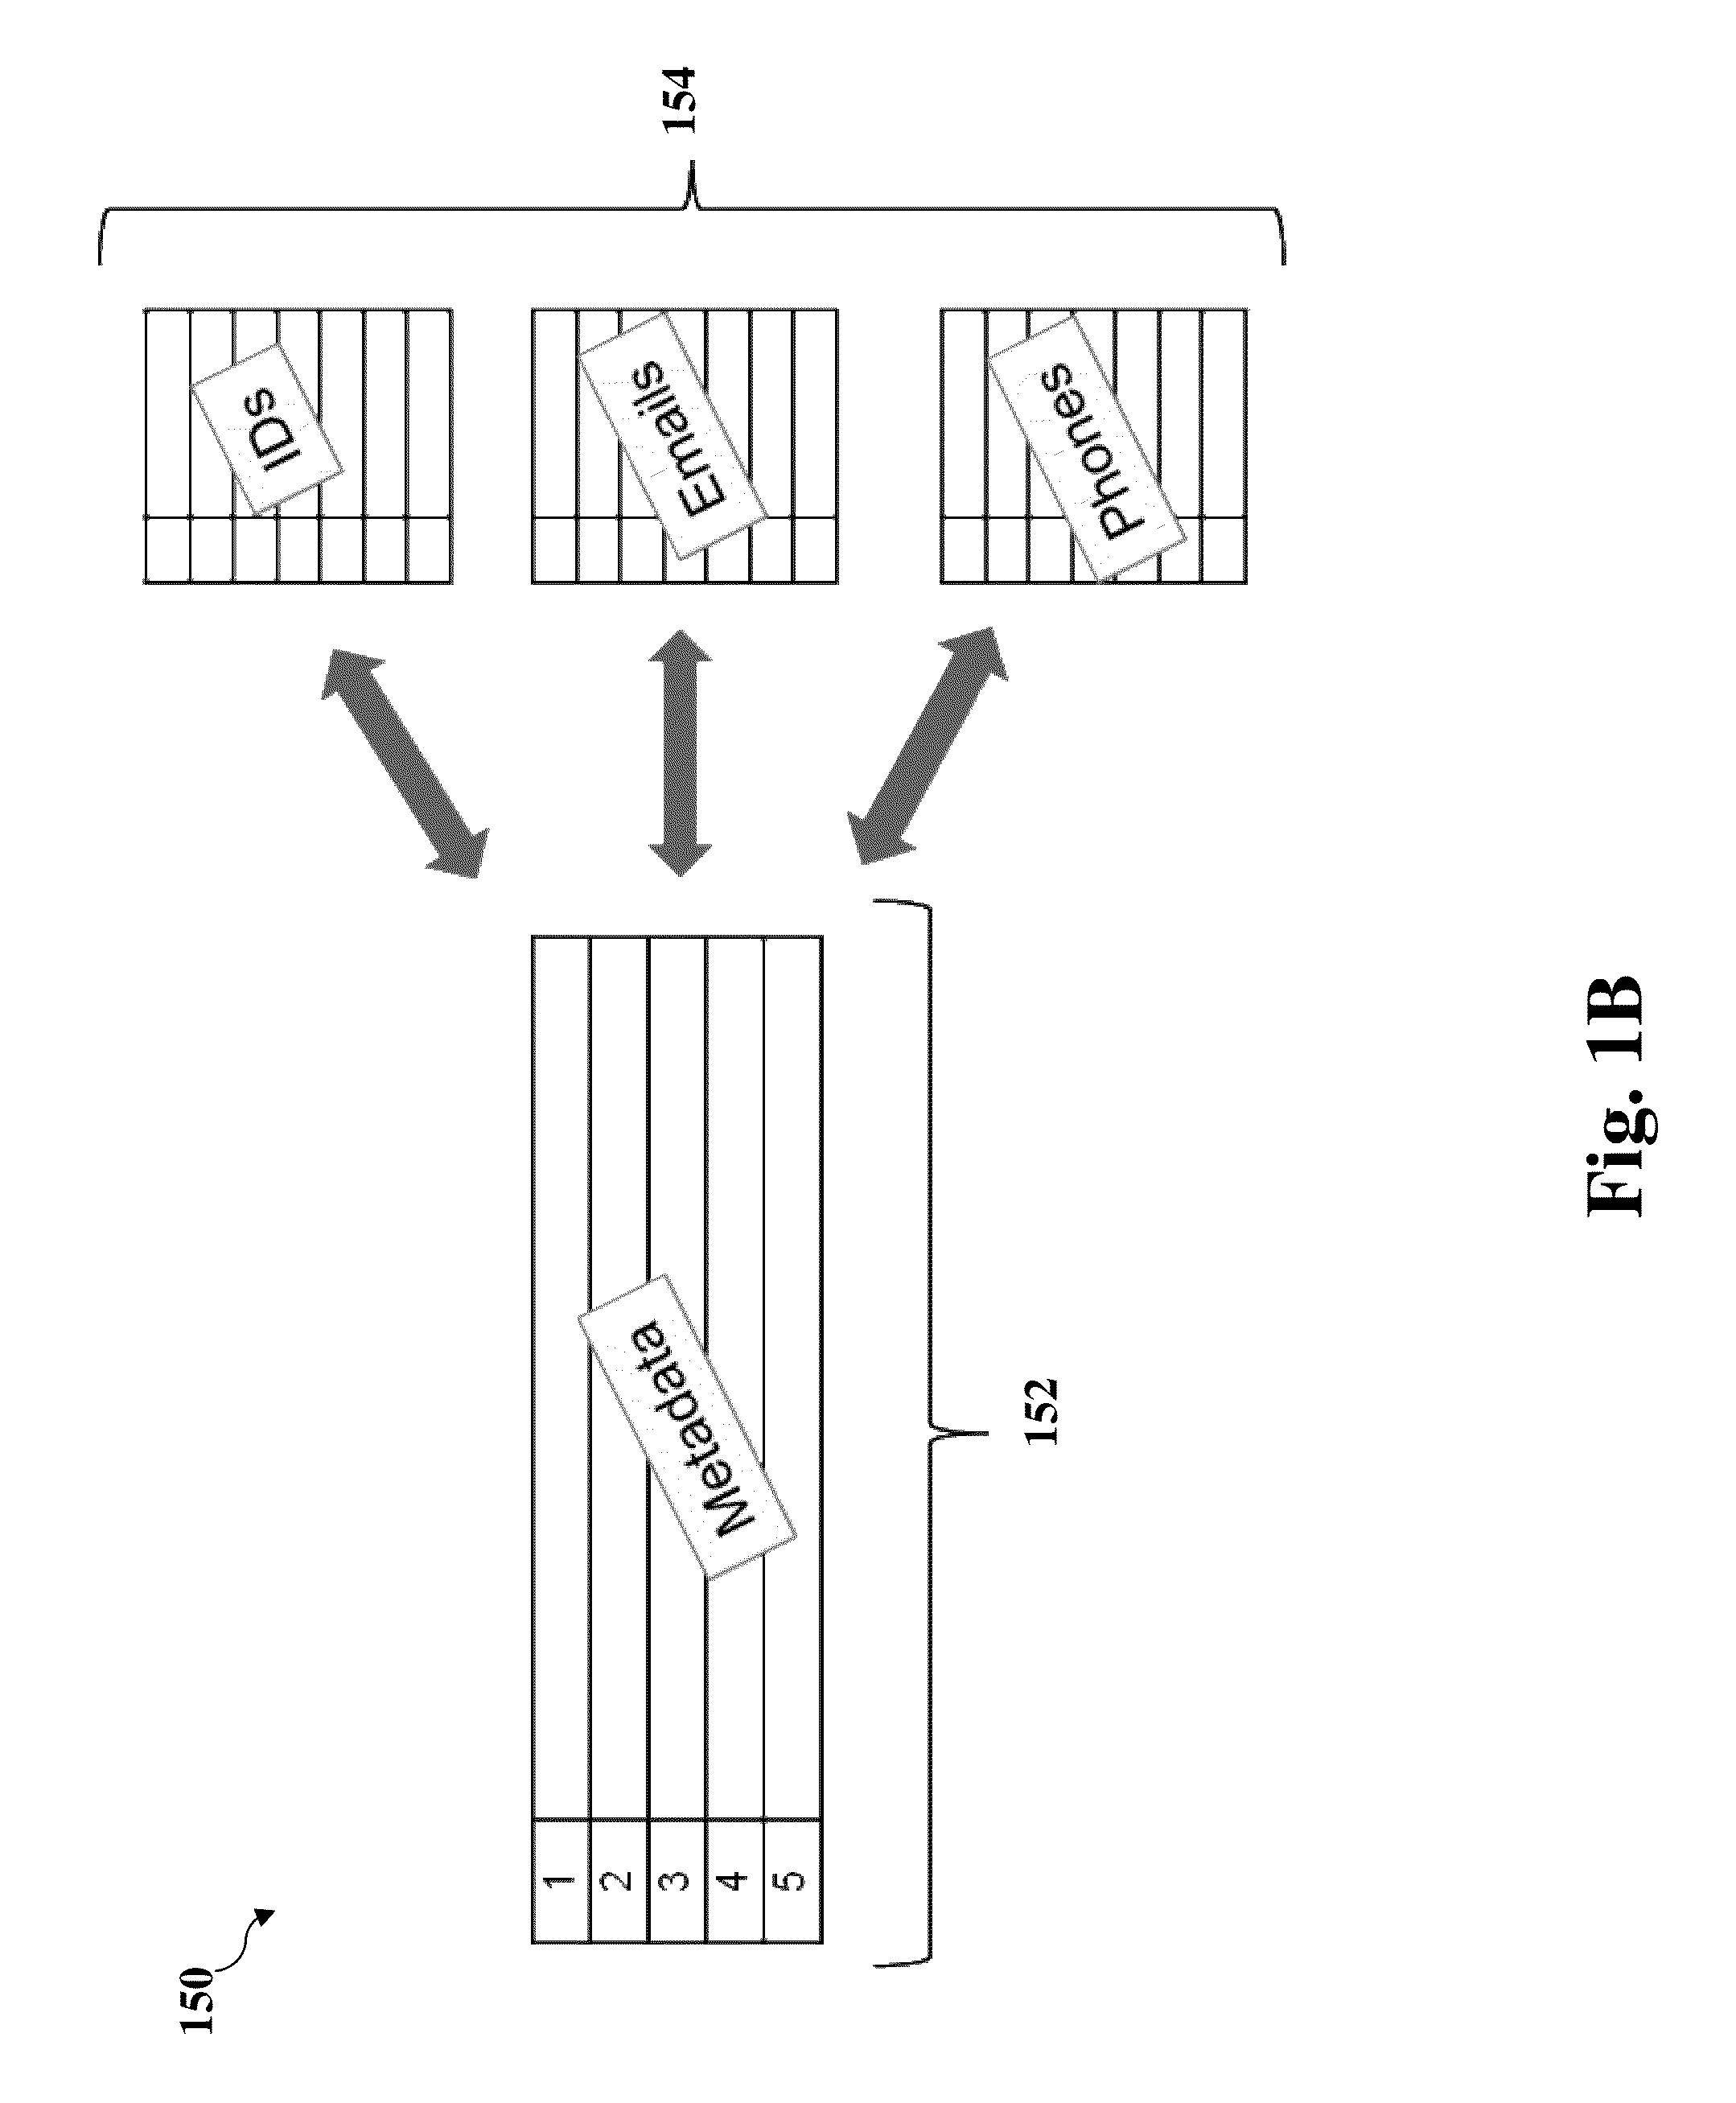 System and method for resolving customer communications